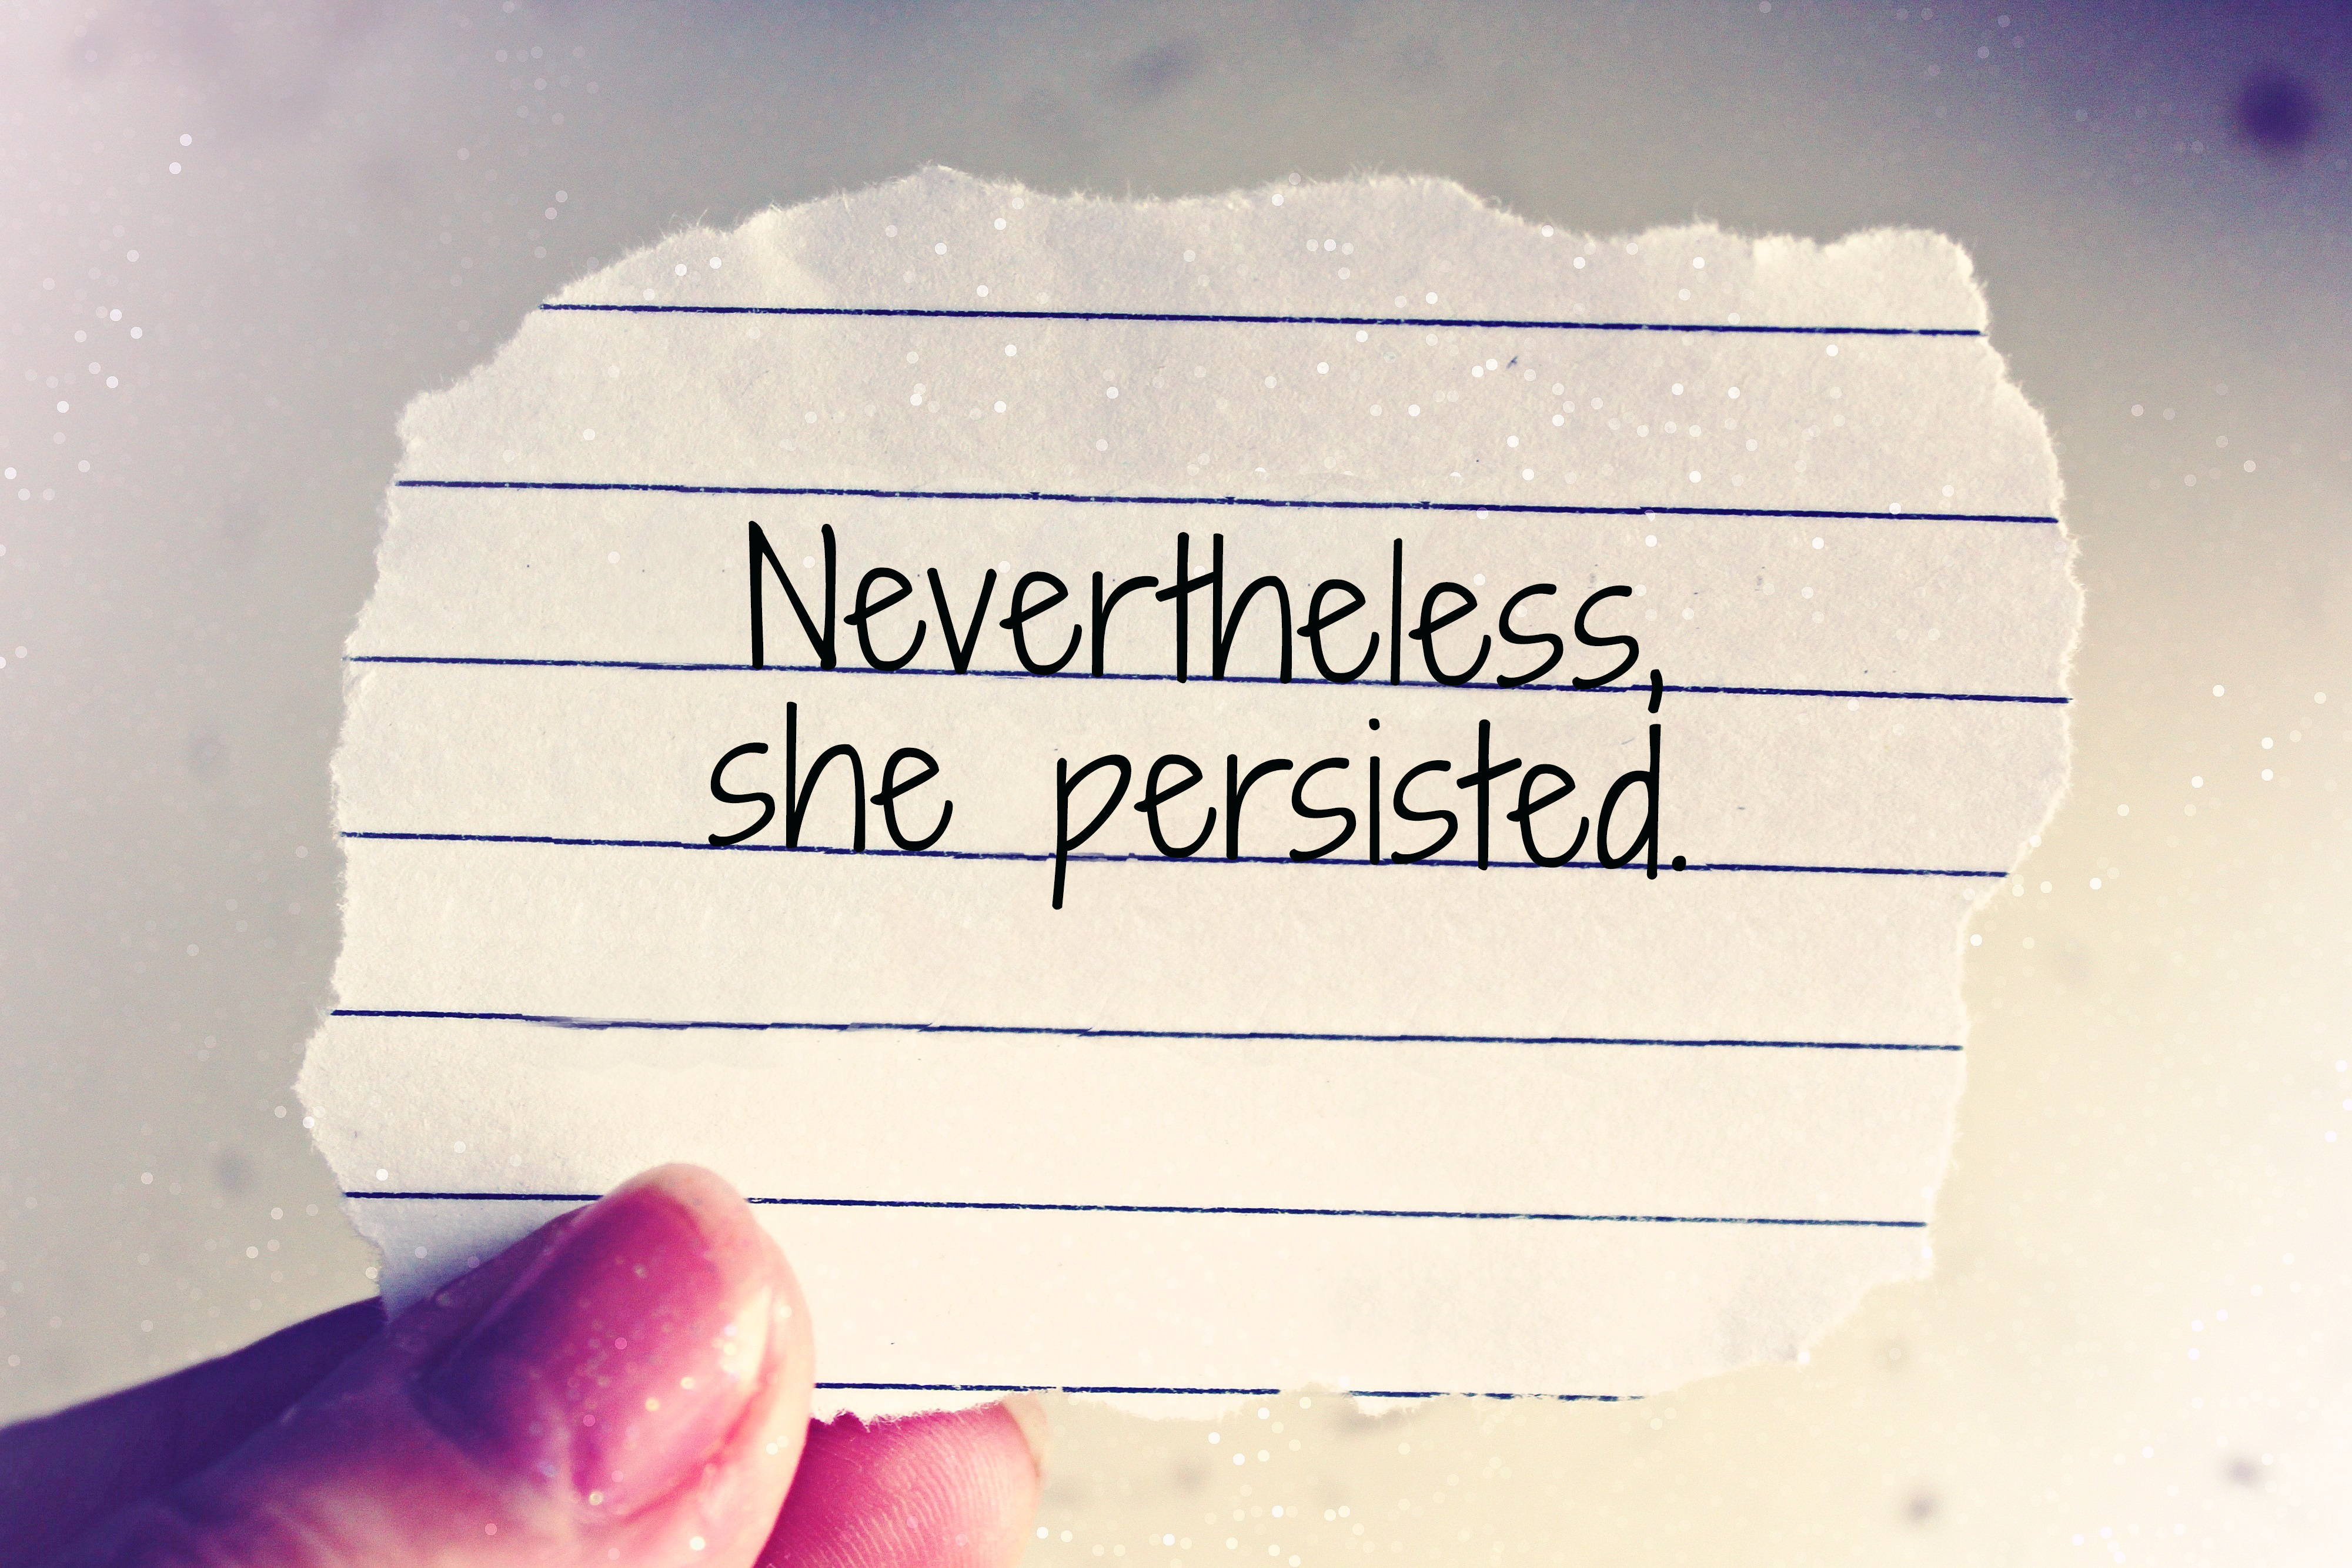 “Nevertheless, she persisted.”